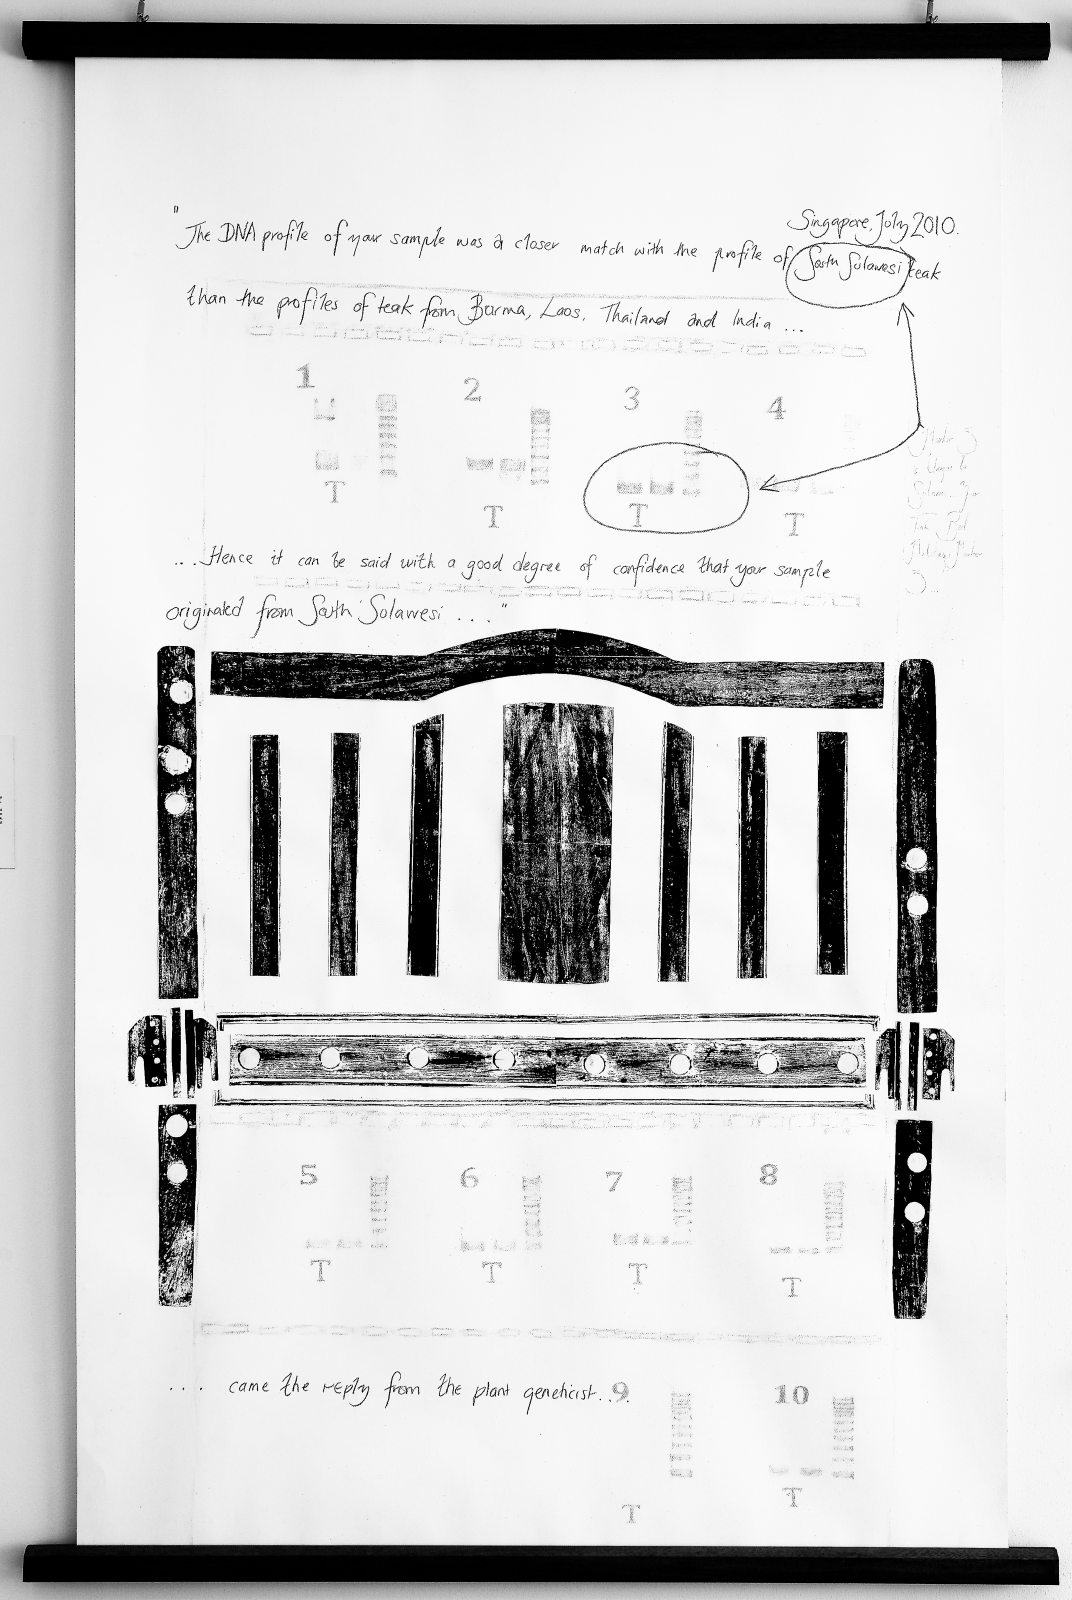 A black and white photo of a woodprint collage of a bad frame here including a print-out of the bed’s DNA profile. Writing and notes are scribbled across the page. 